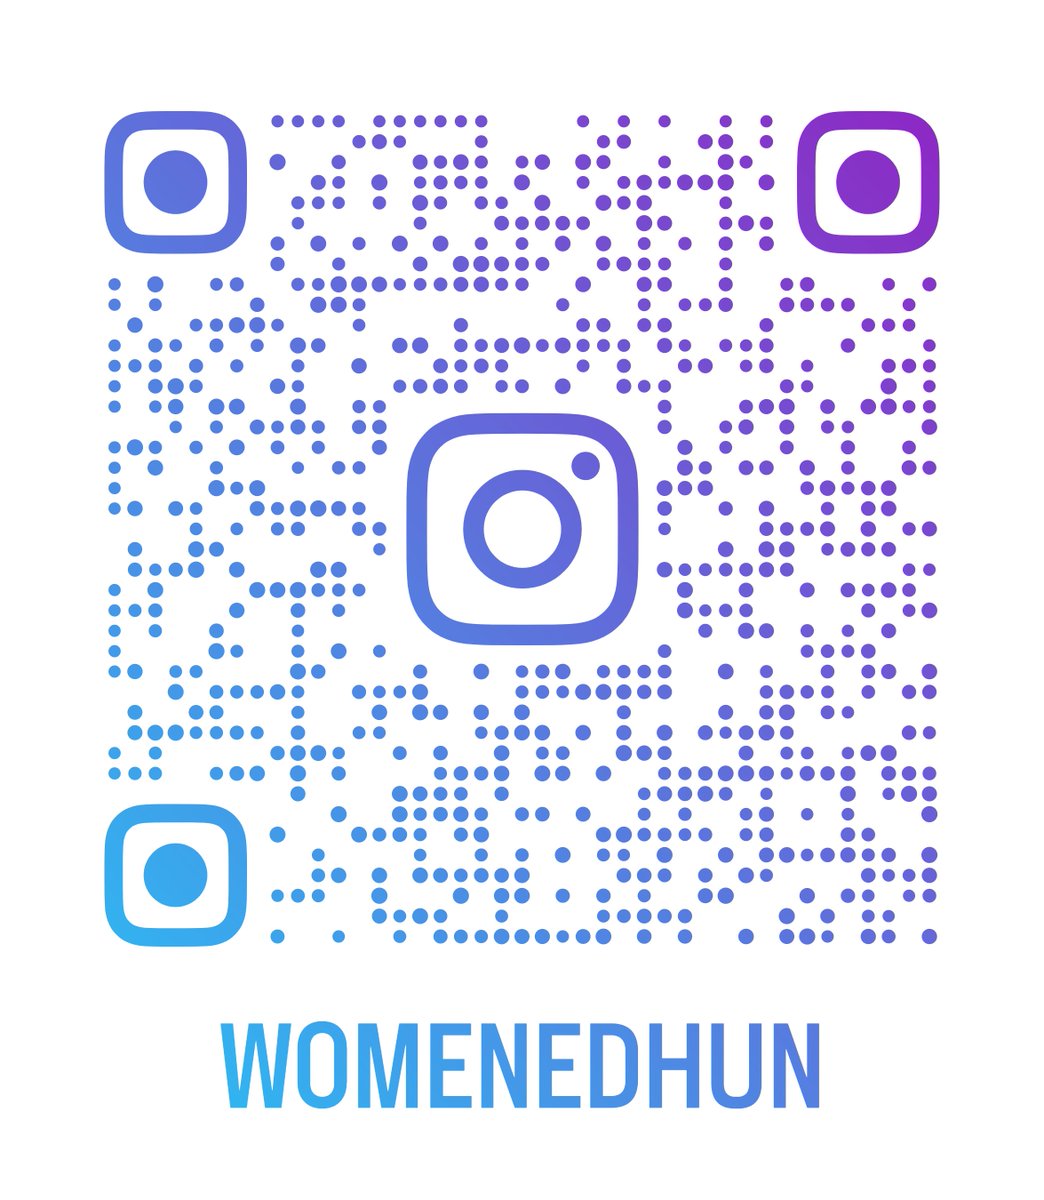 #FridayFeature #WomenEd  
This week's recommendation from @WomenEdHUN is to follow us on Instagram! instagram.com/womenedhun/